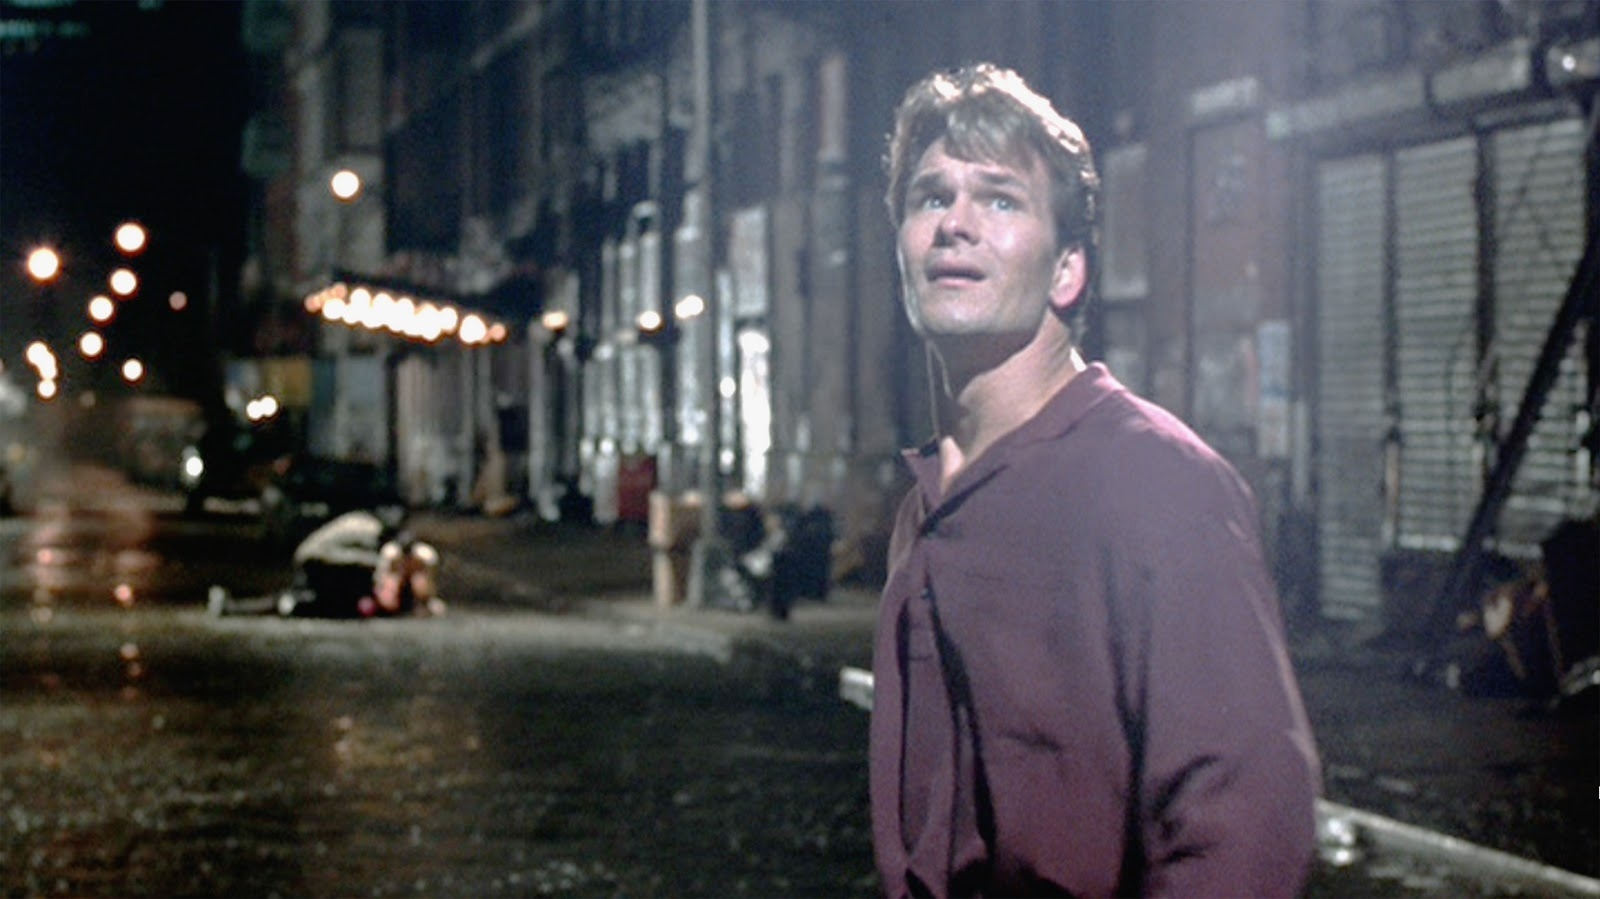 Ghost movie patrick swayze torrent image acquisition toolbox torrent